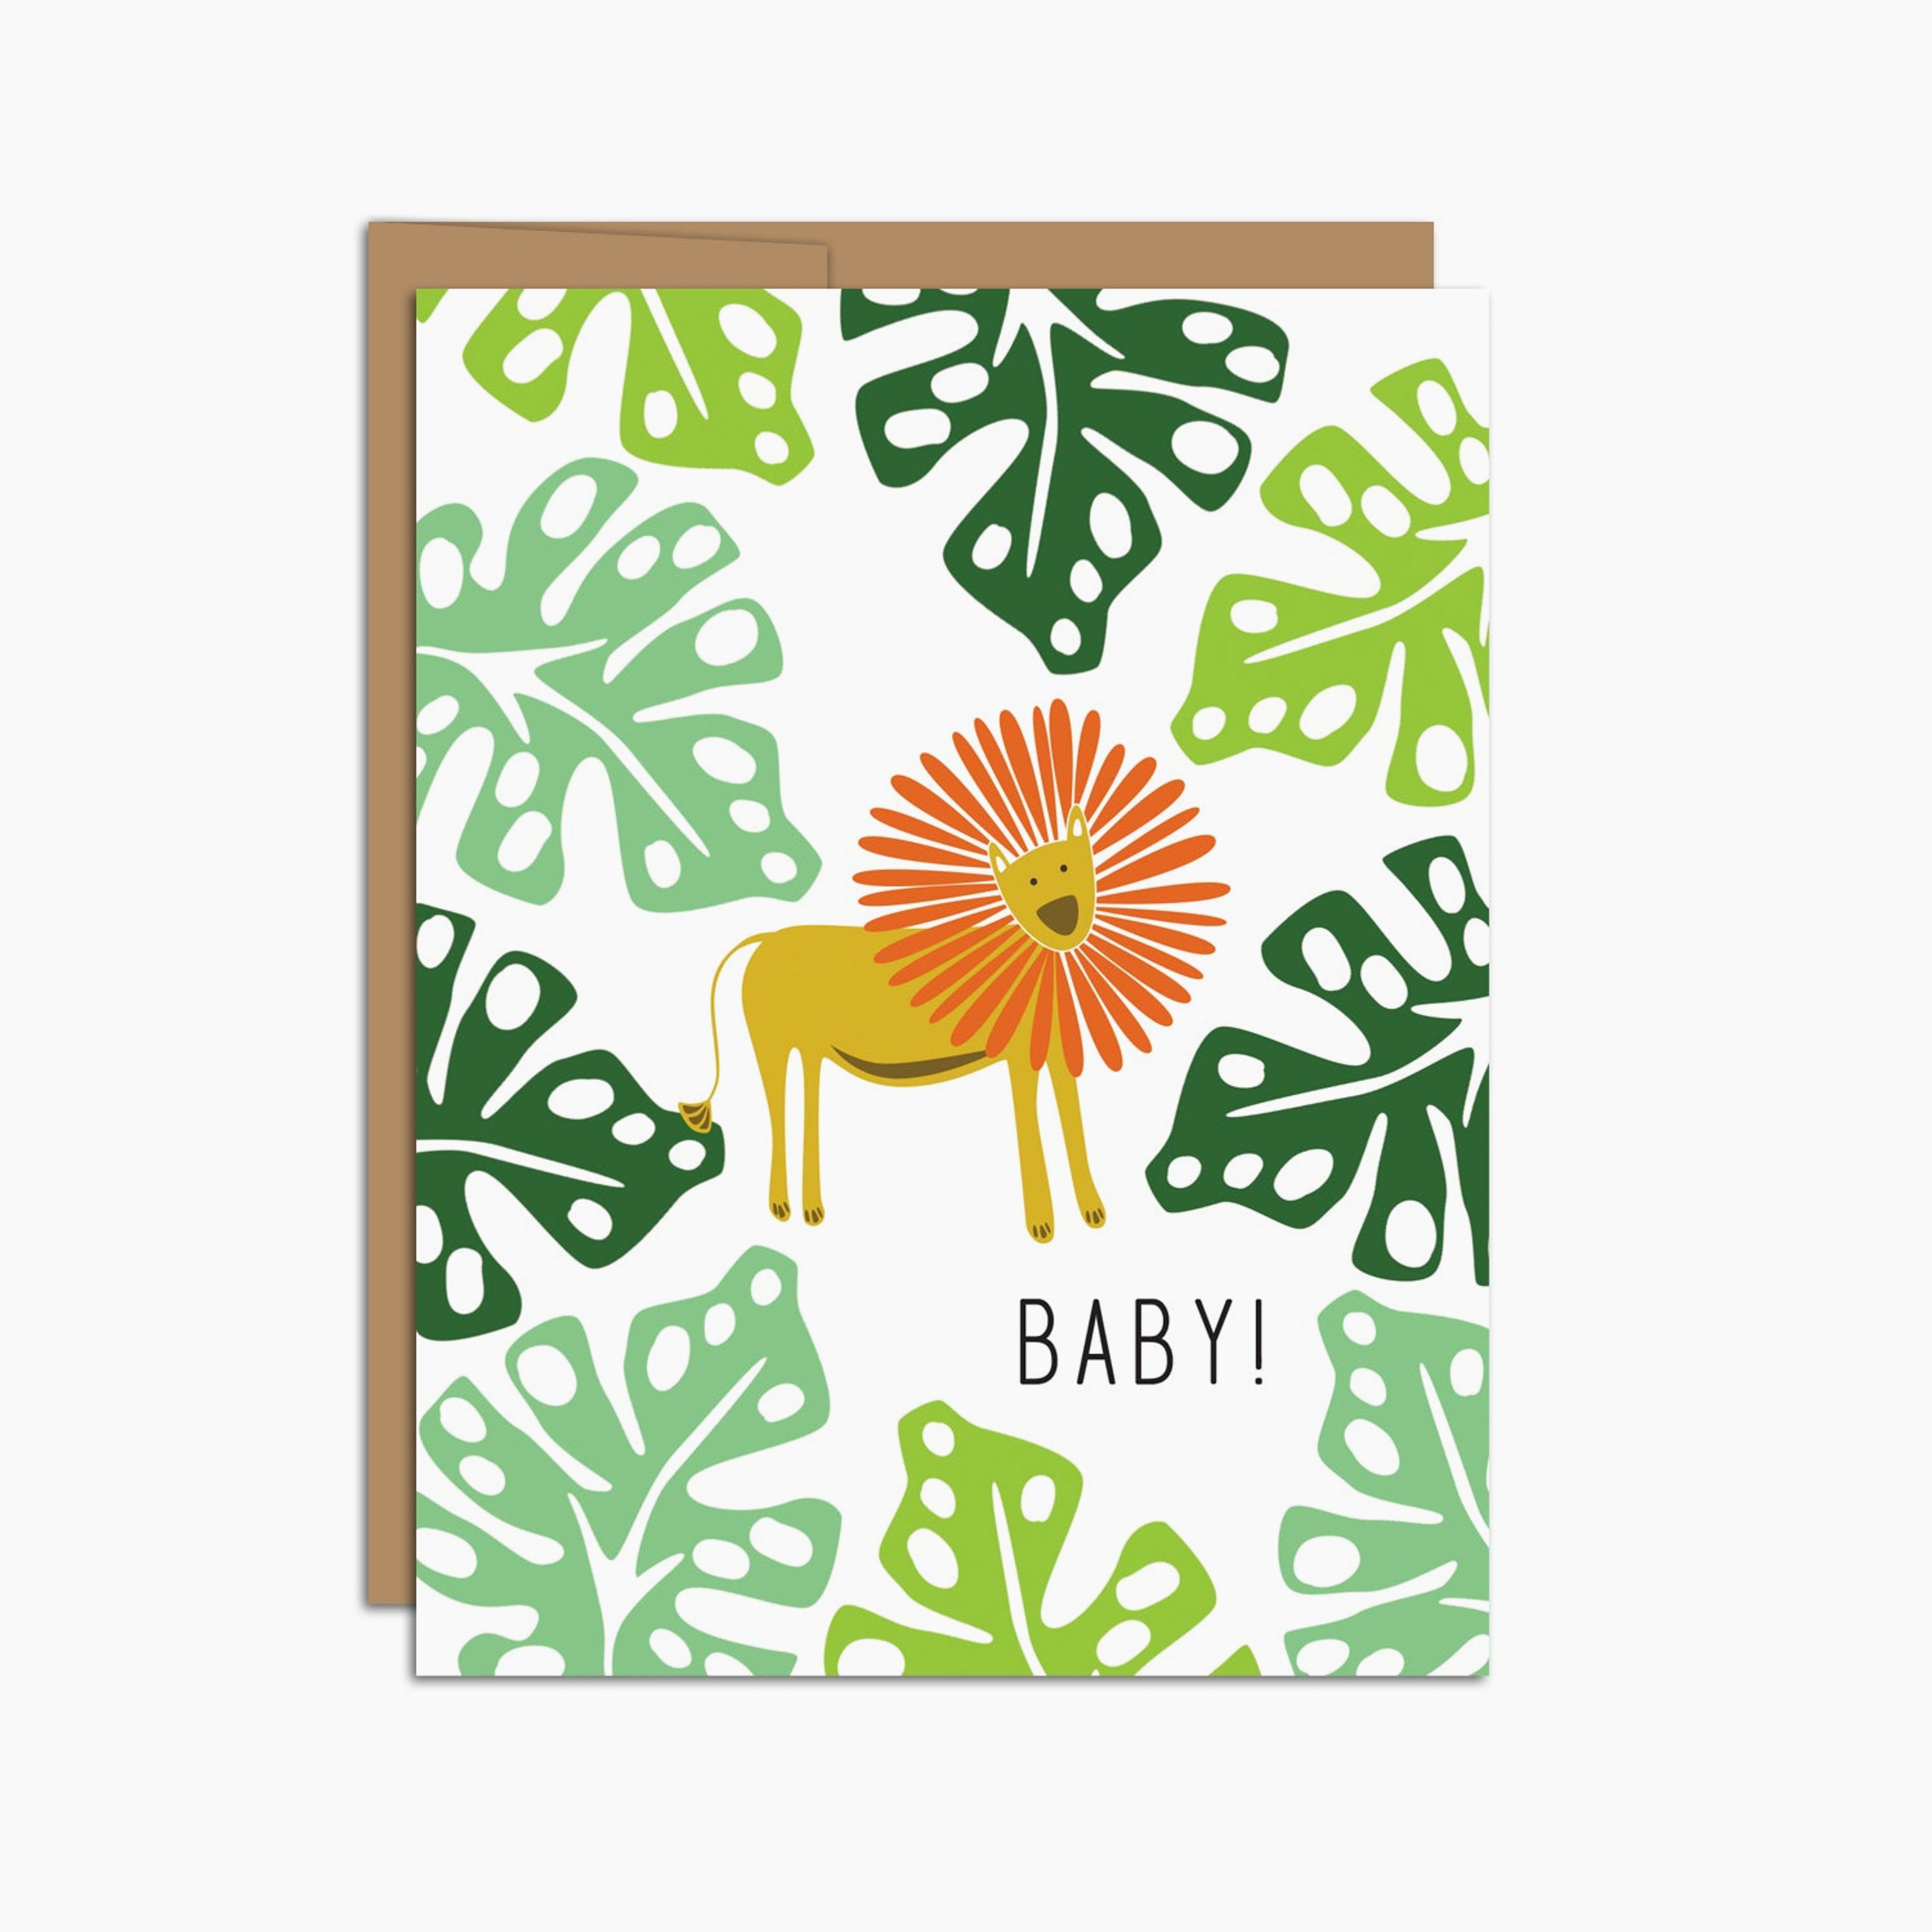 "Baby!" with Jungle Leaves + Lion Greeting Card